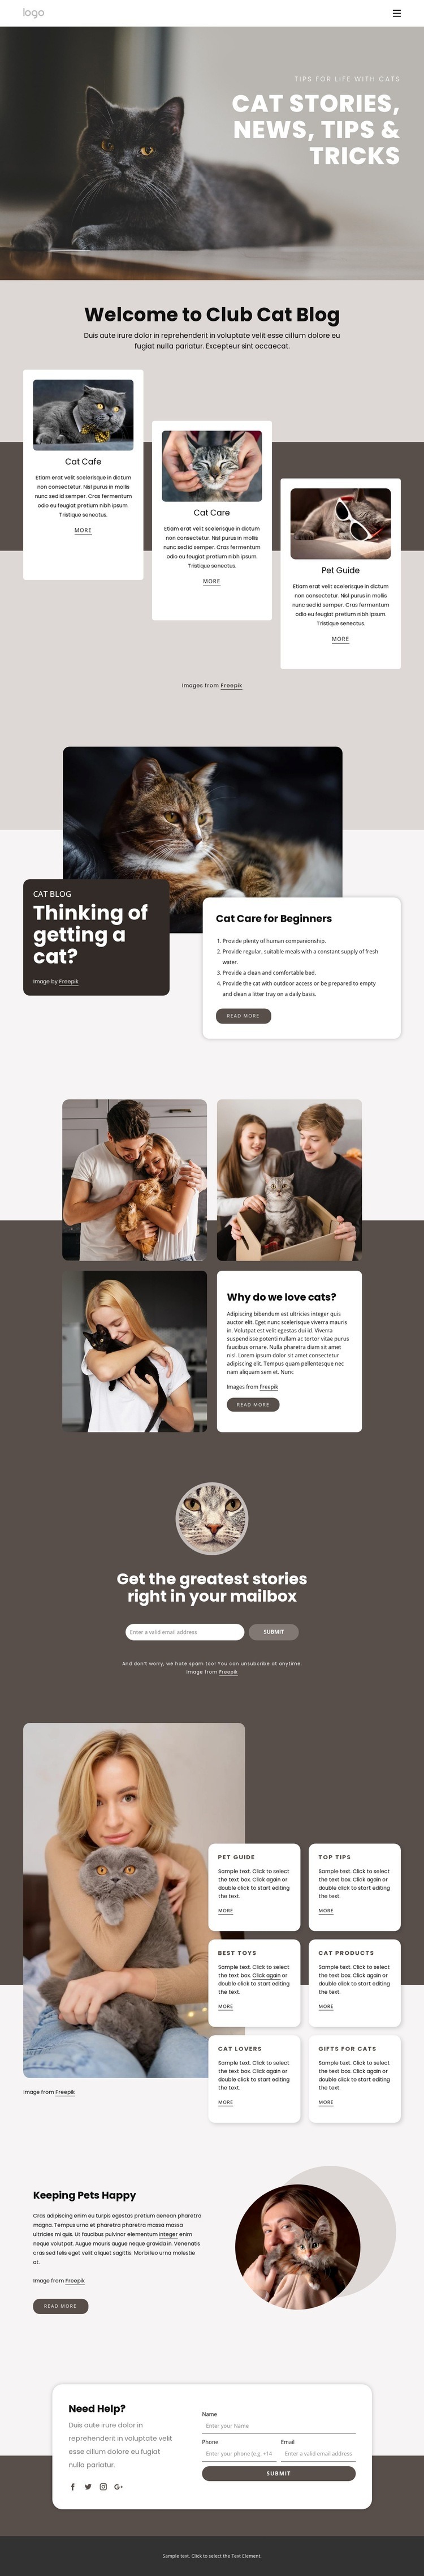 Cat stories, tips and tricks Wix Template Alternative